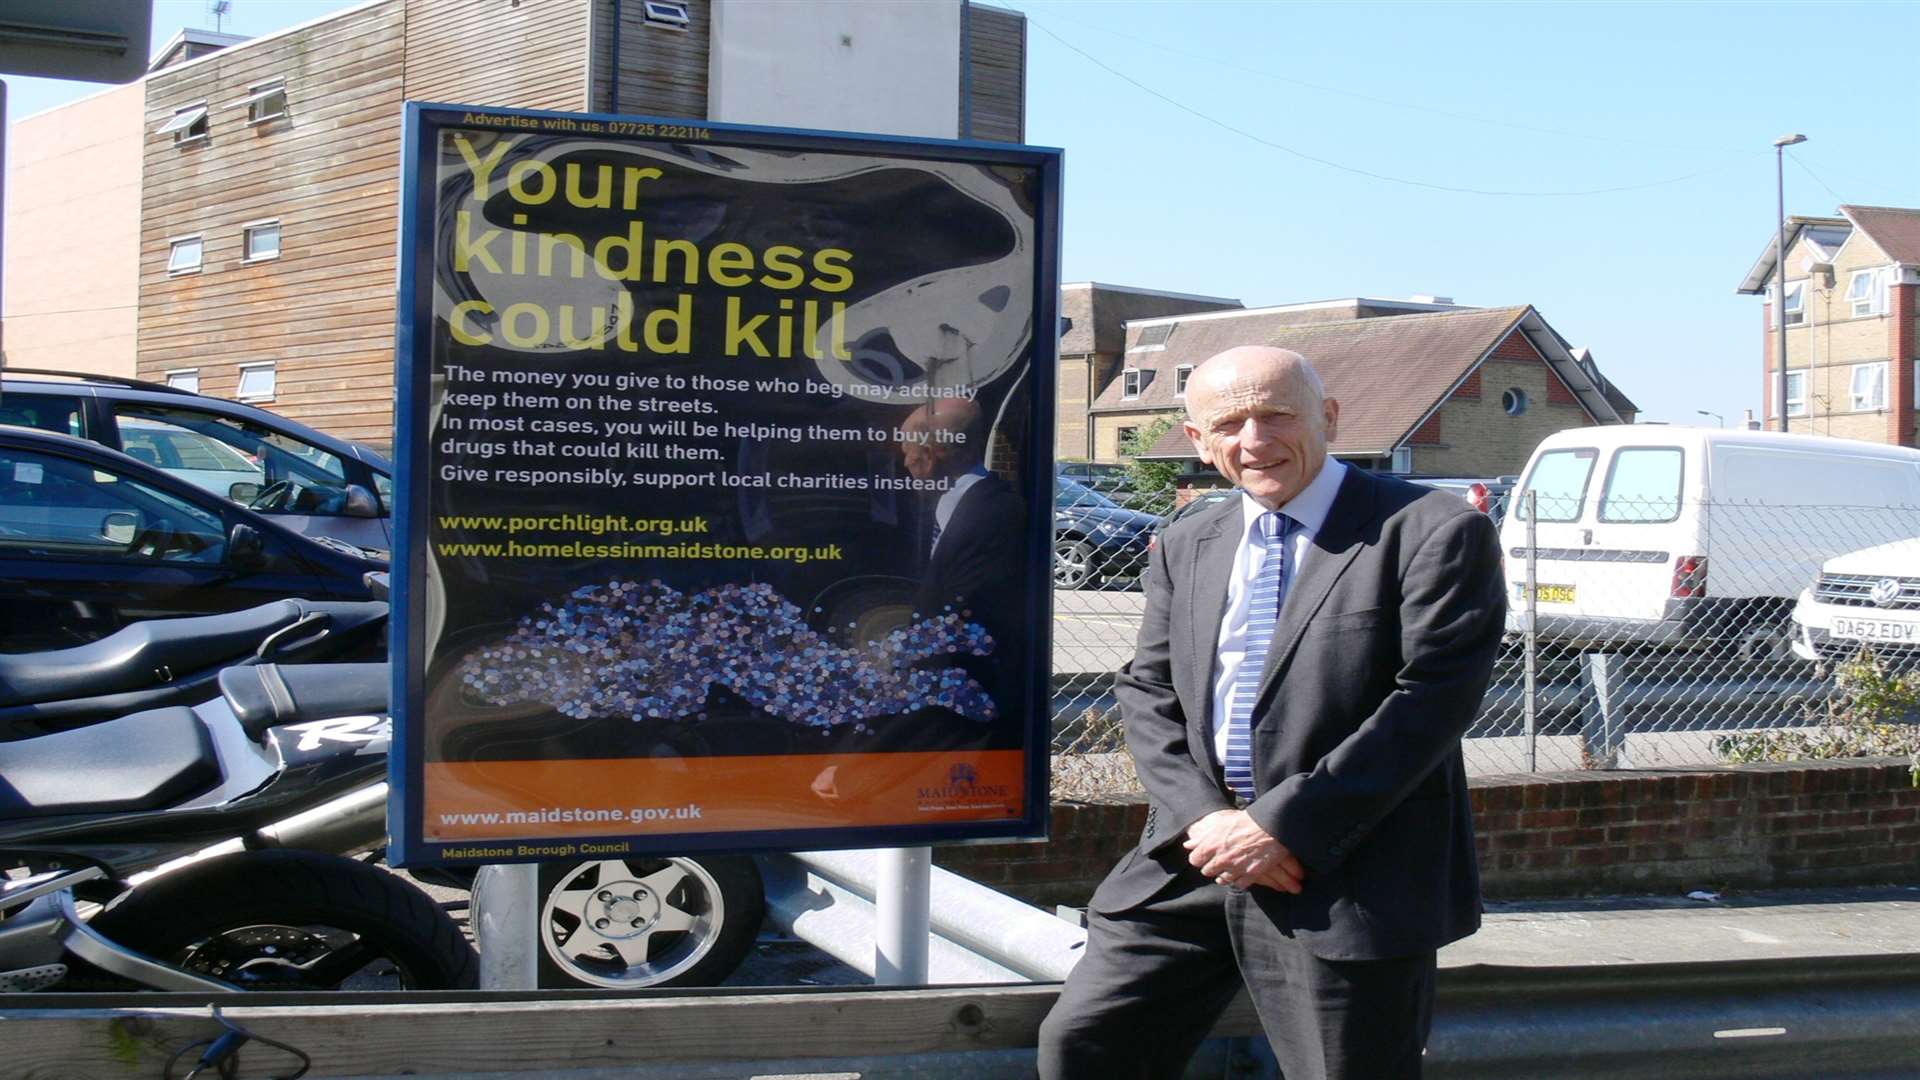 Maidstone councillor John A Wilson punching home the message - "your kindness could kill"